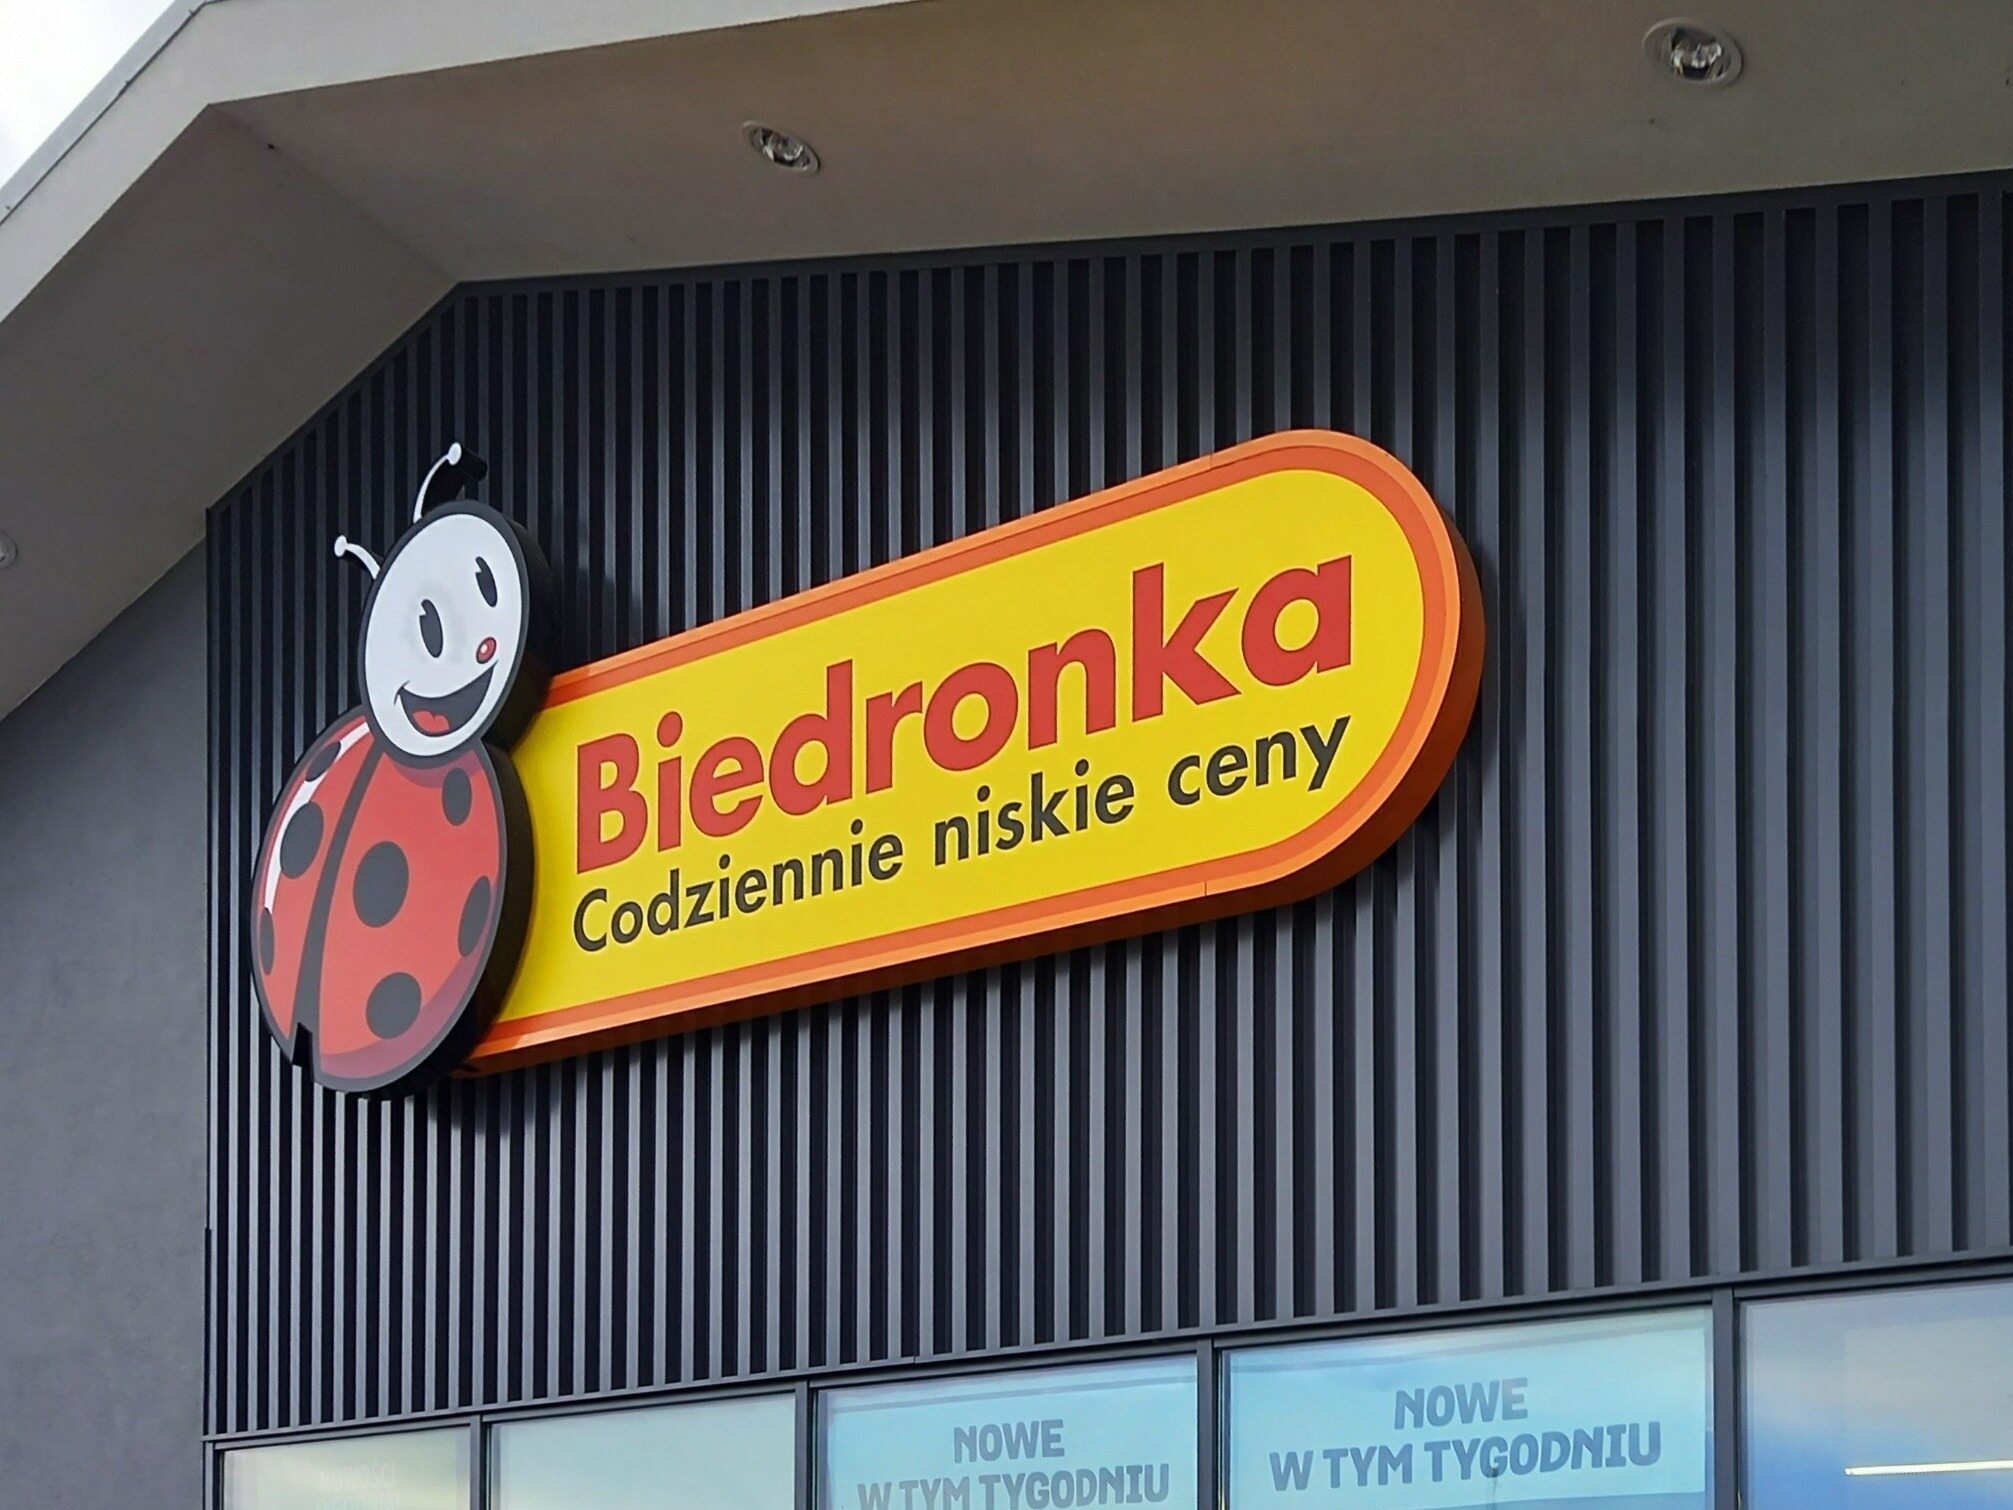 President Jeronimo Martins on the price war with Lidl.  He talks about "Biedronka DNA"